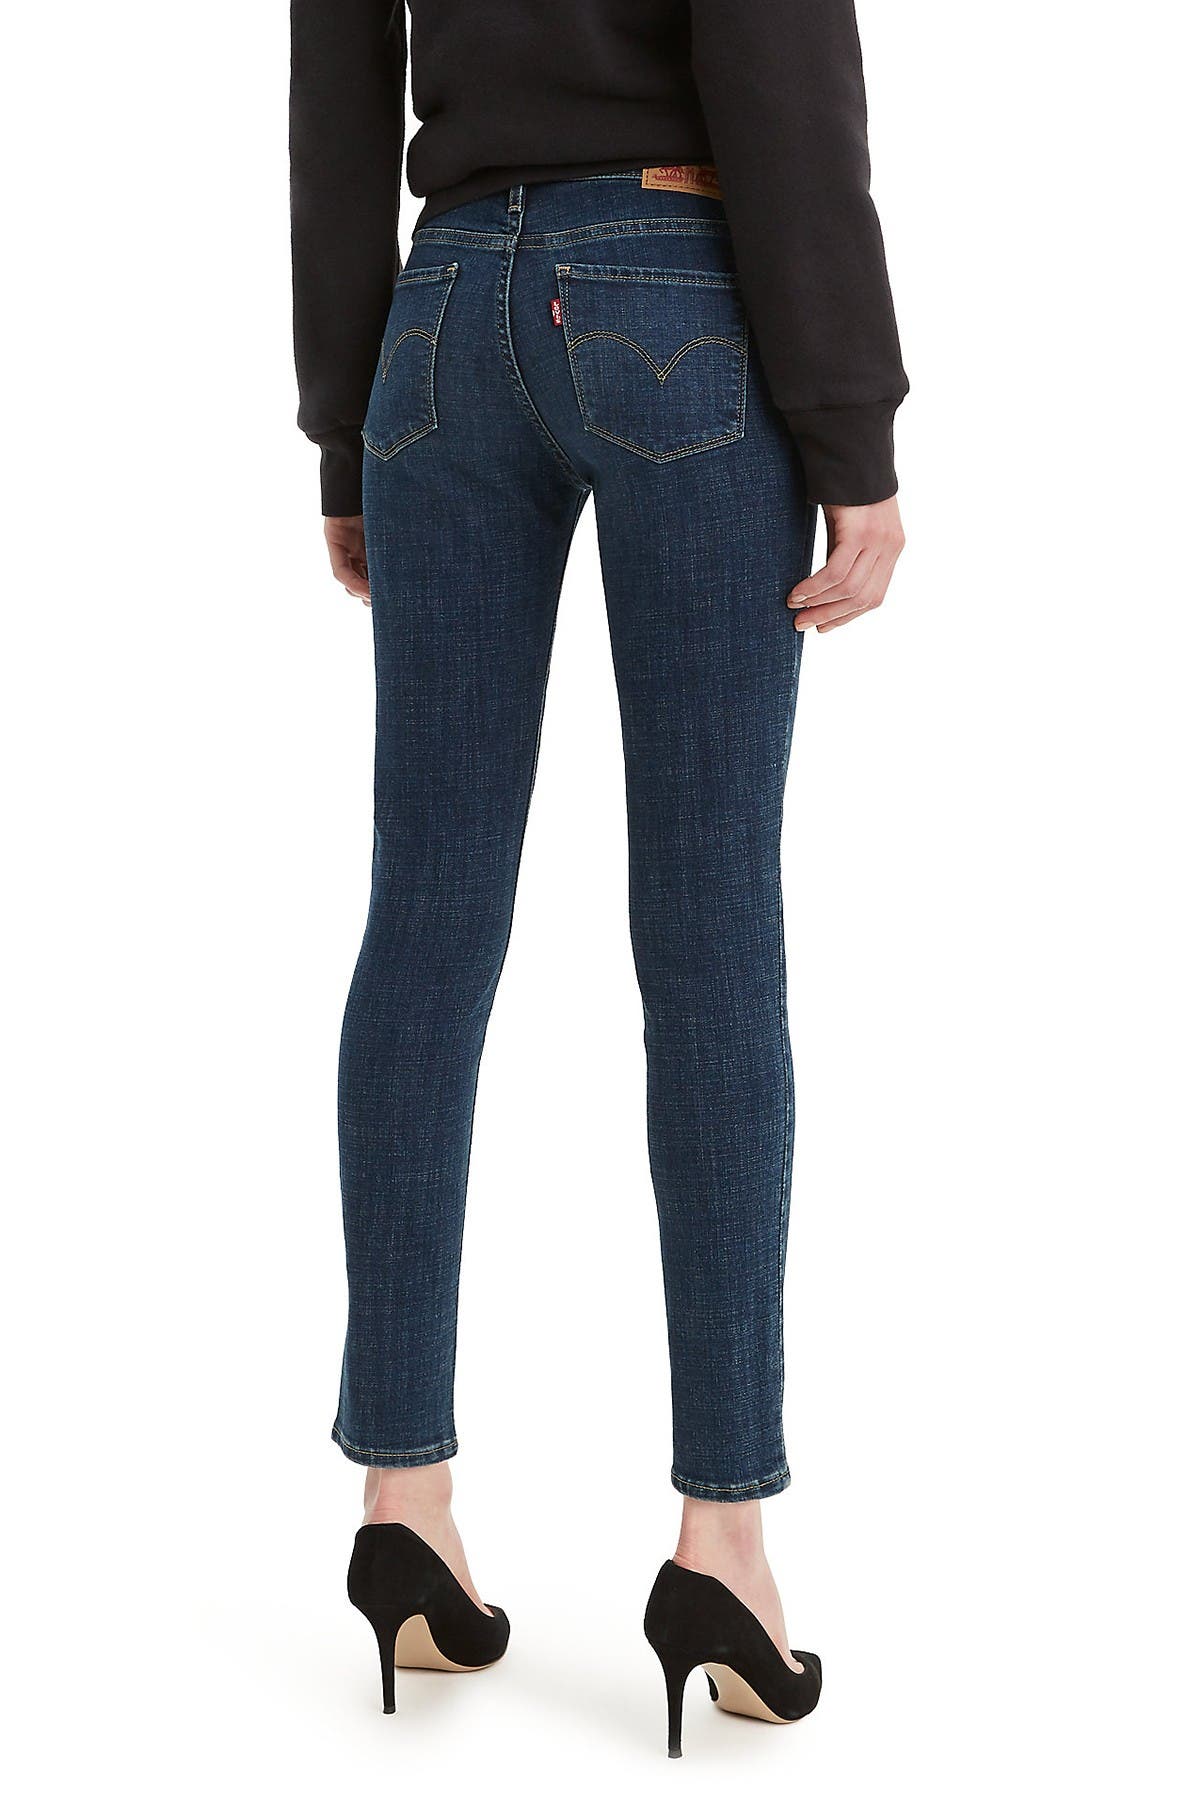 711 skinny ankle jeans levis